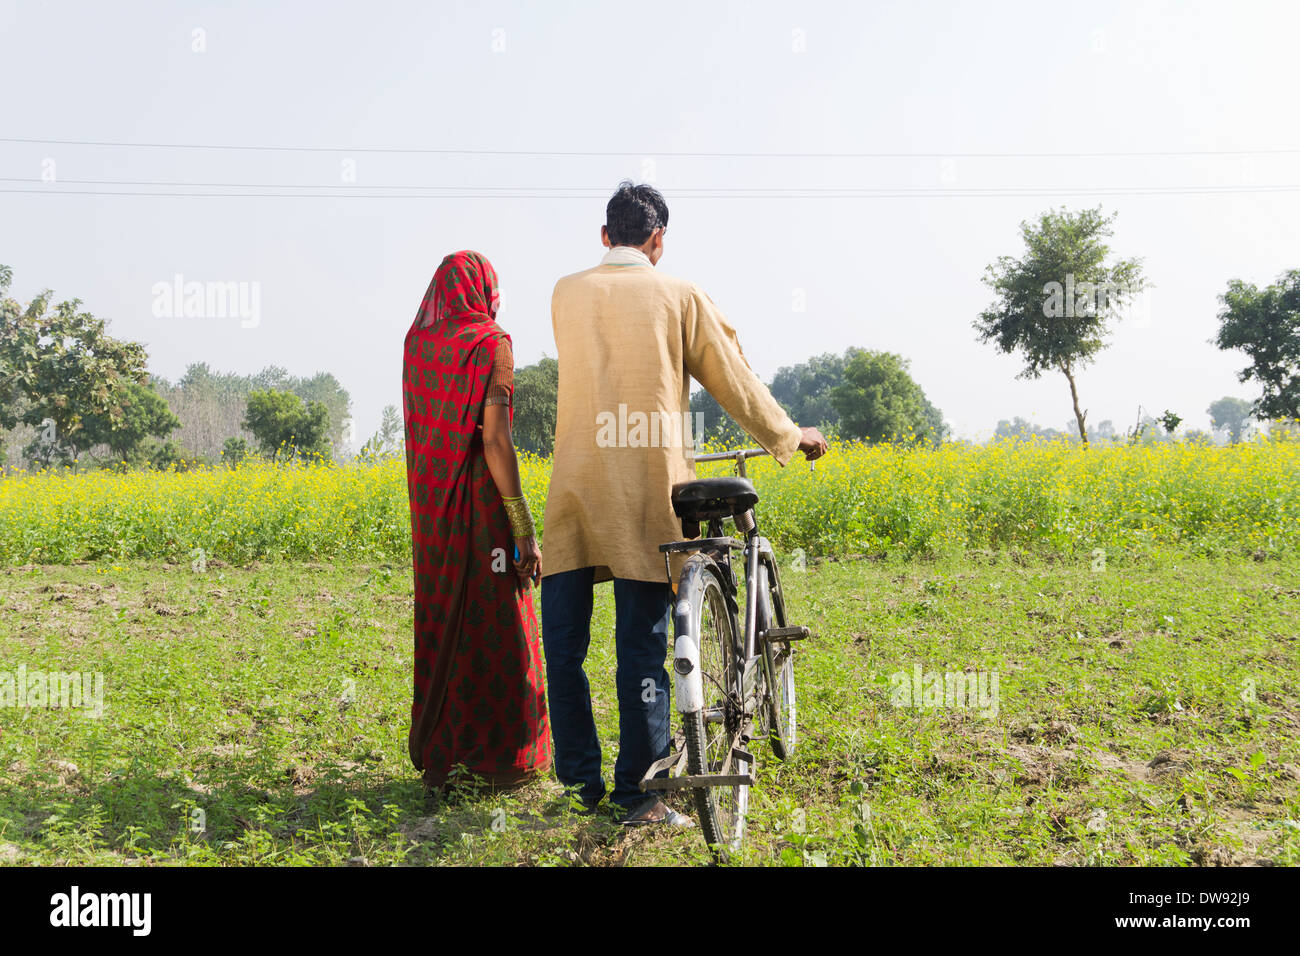 Indian farmer standing with wife in farm Stock Photo